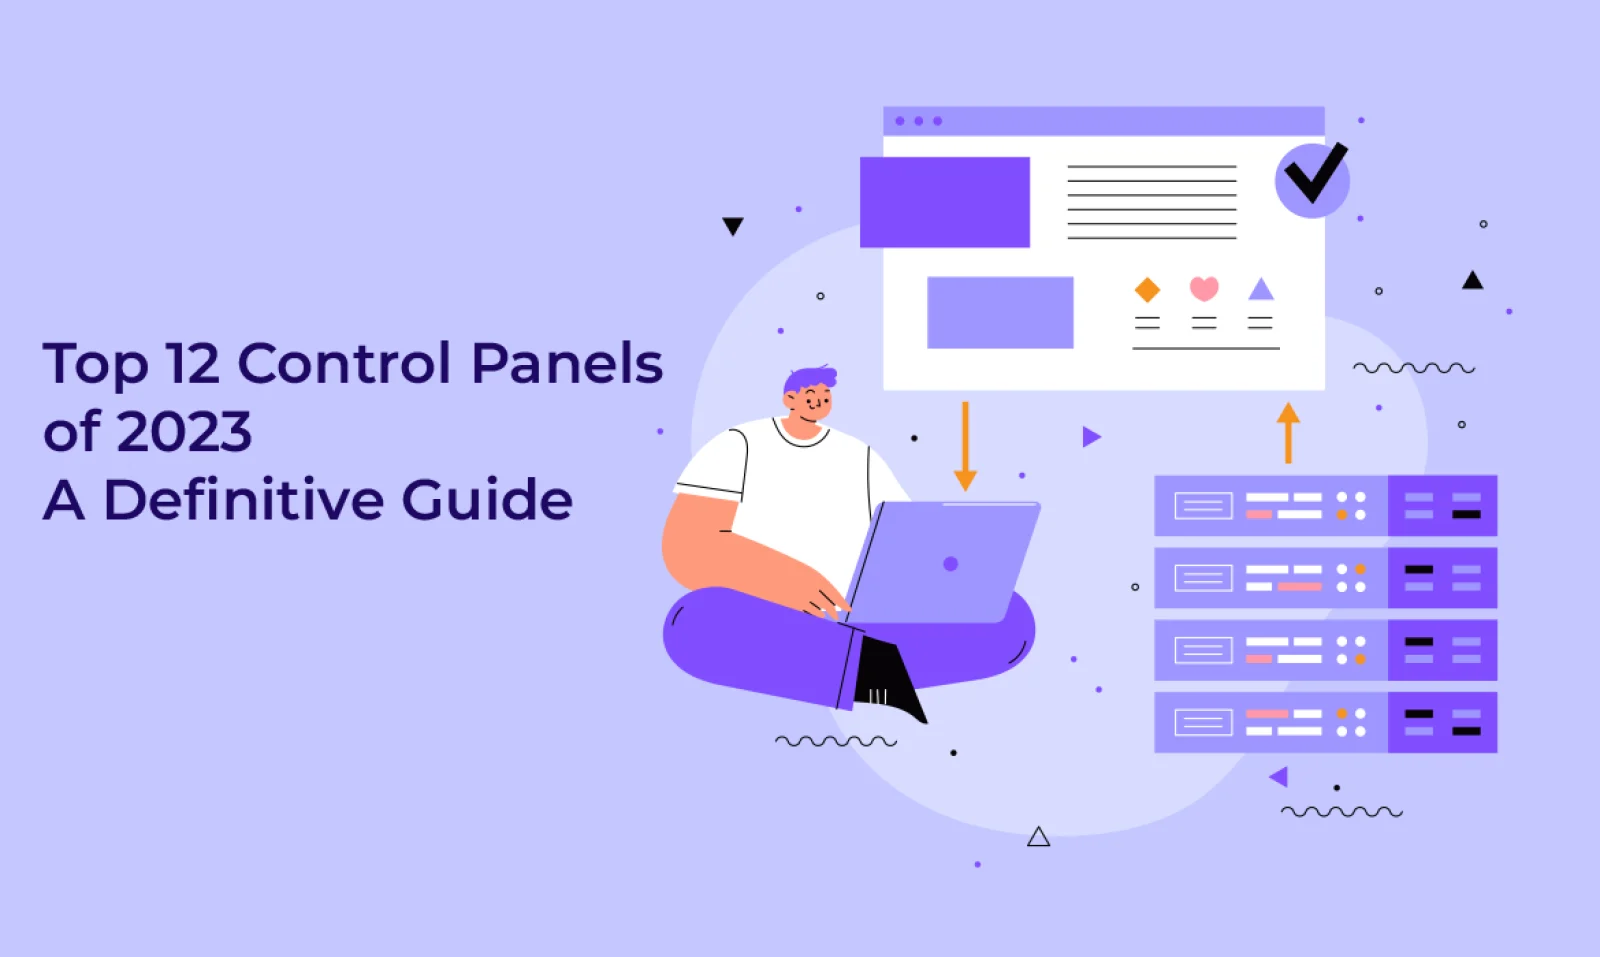 Top 12 Control Panels of 2023 A Definitive Guide